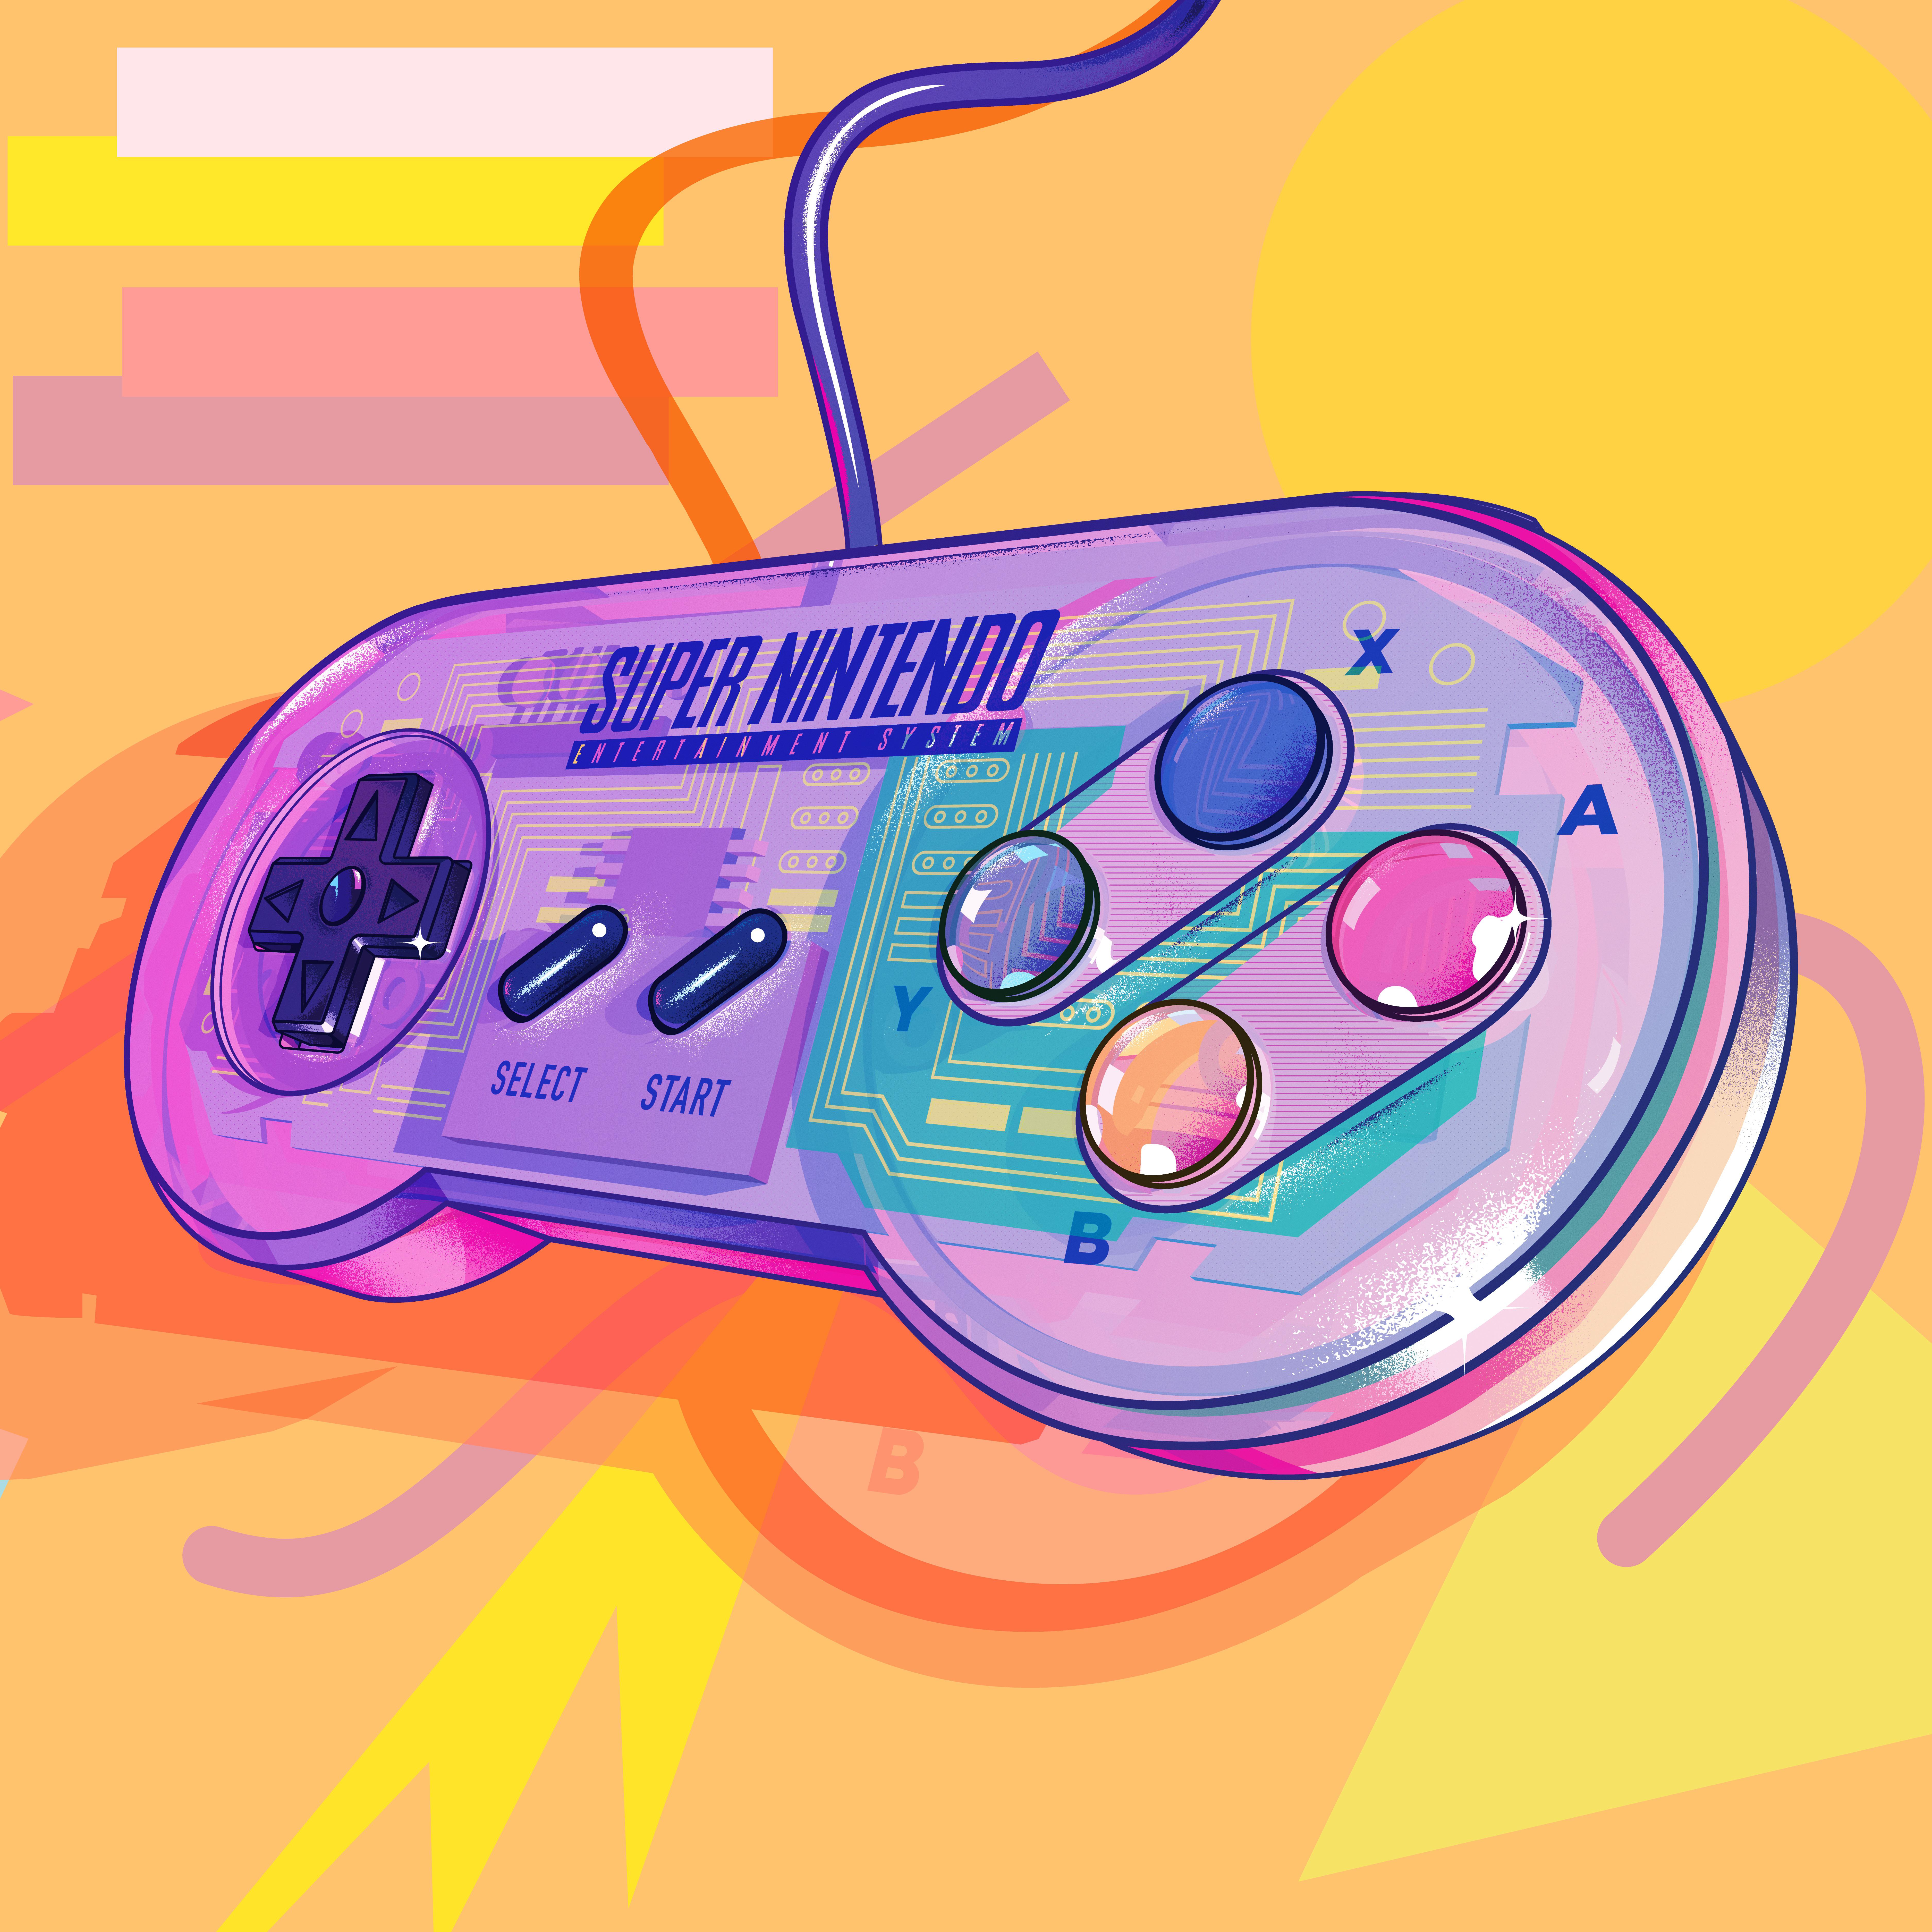 A digital illustration of a Super Nintendo controller on a yellow background - Nintendo